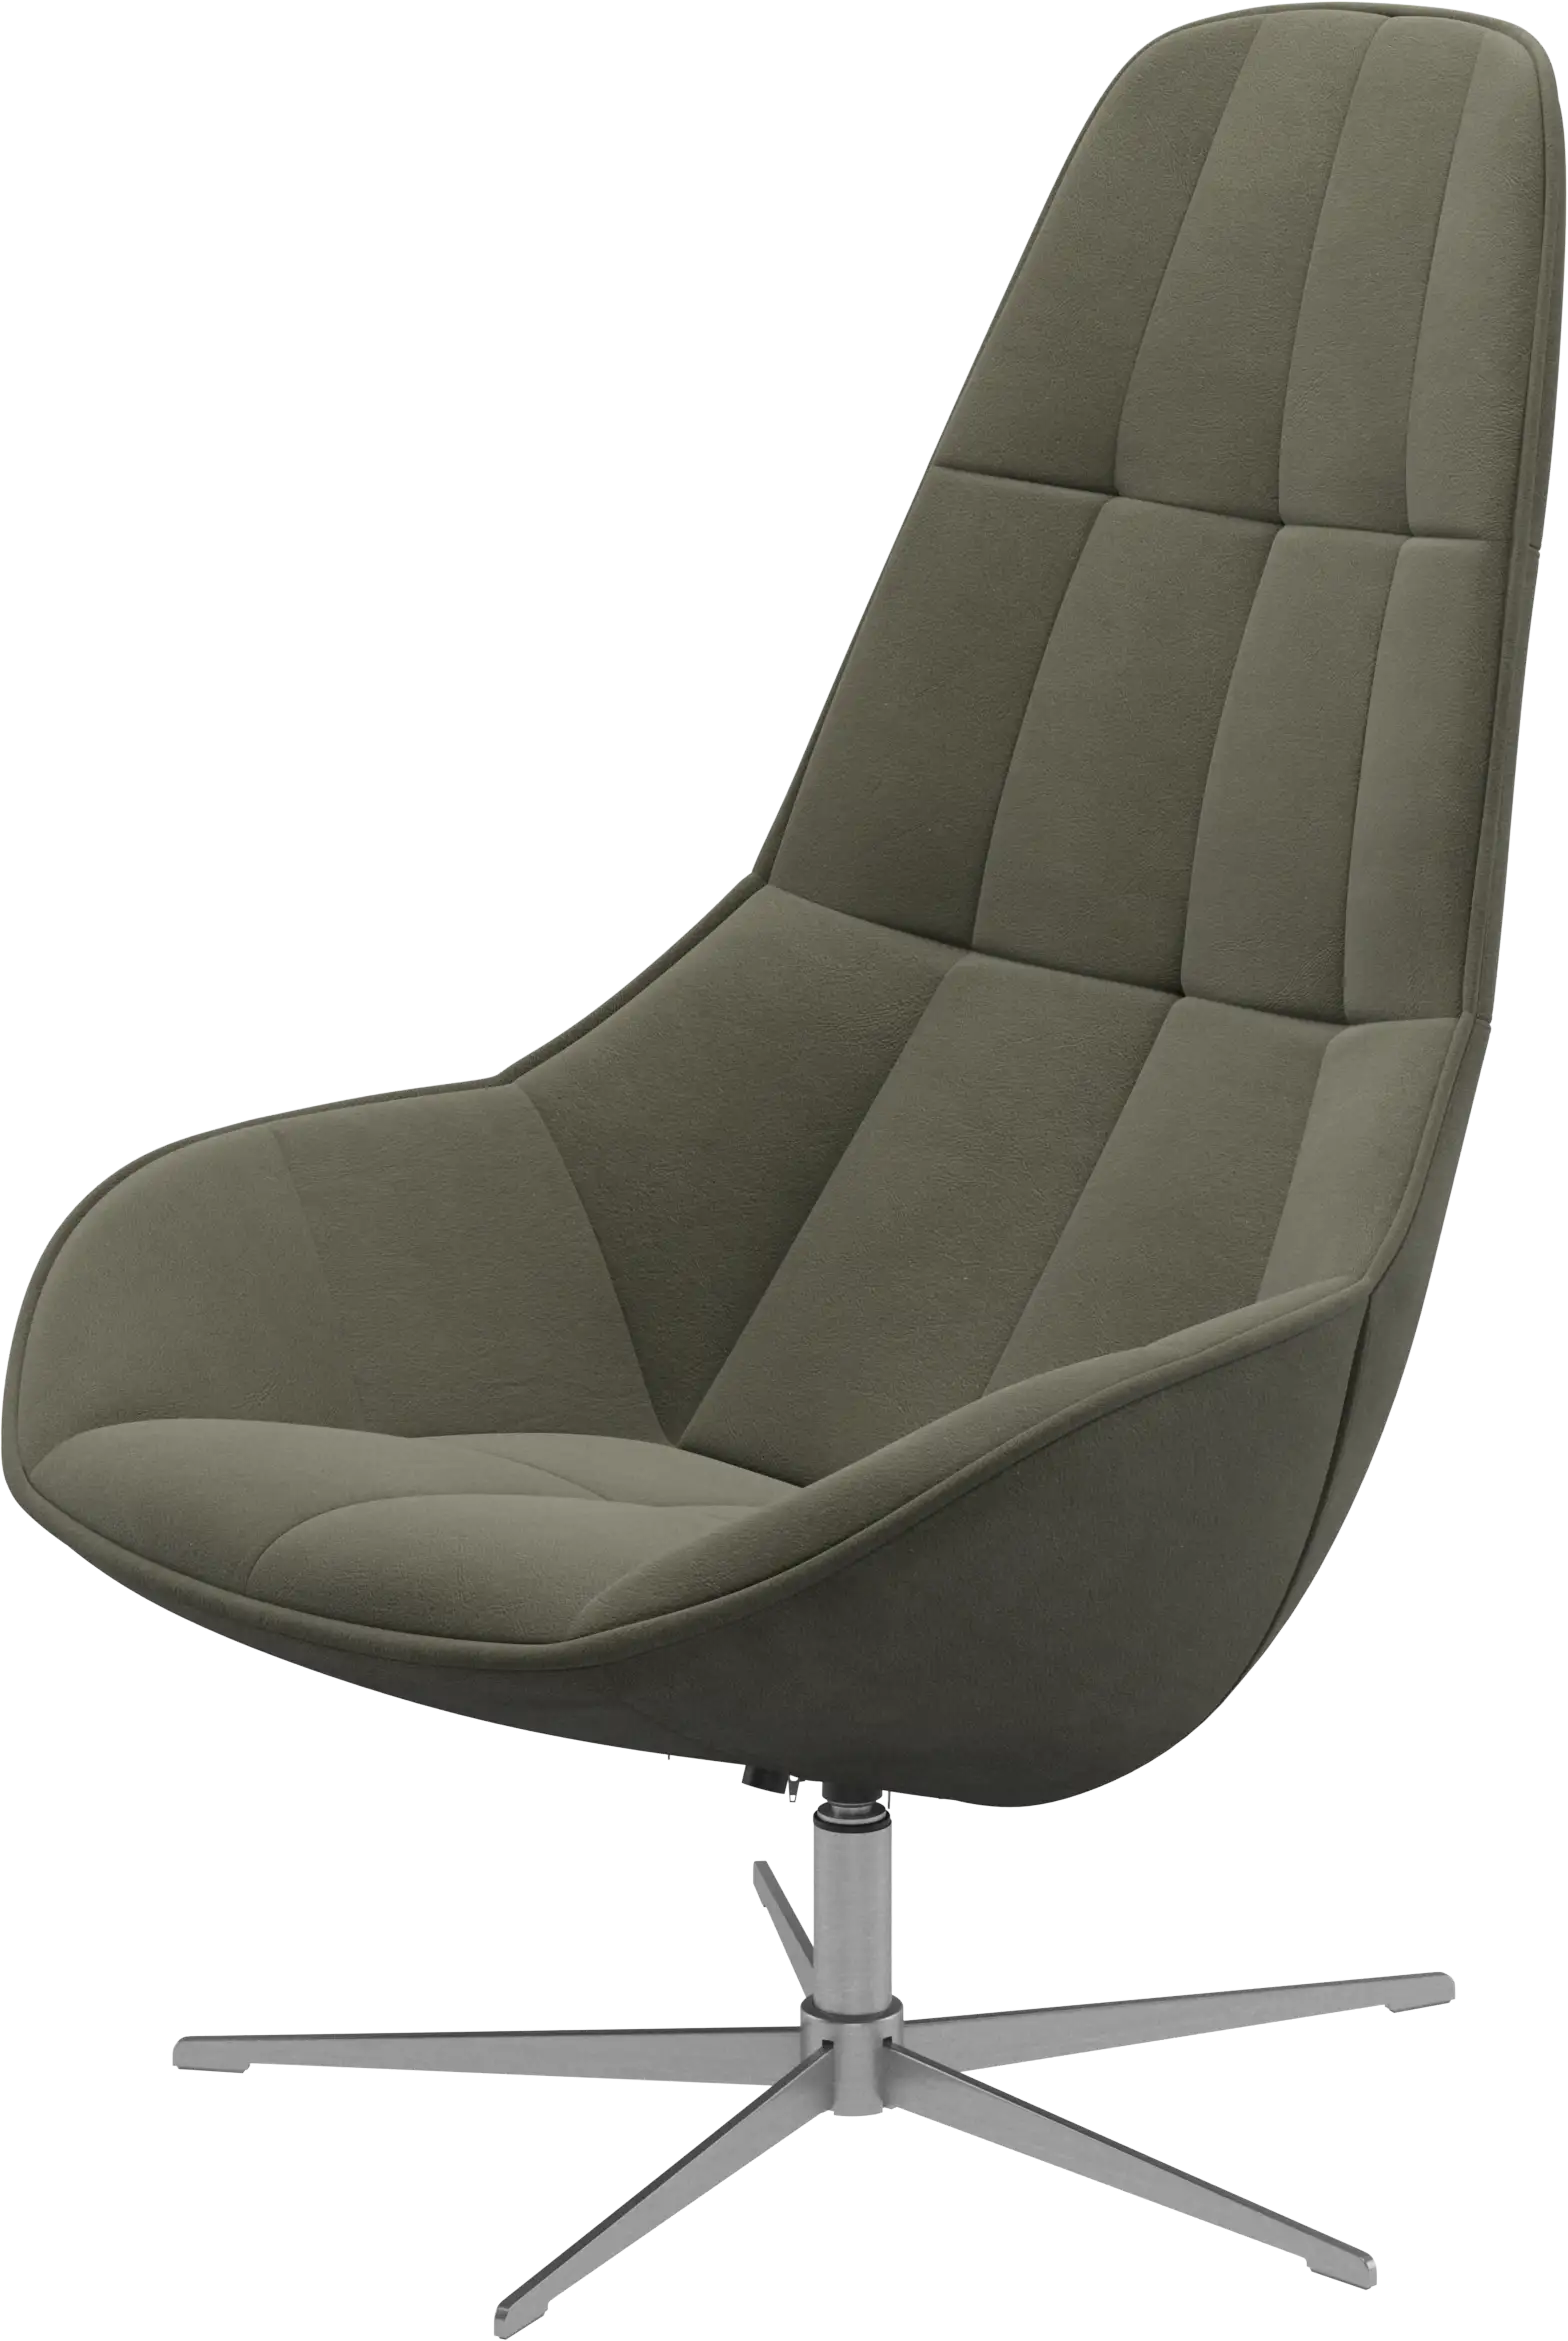 Boston chair with swivel function